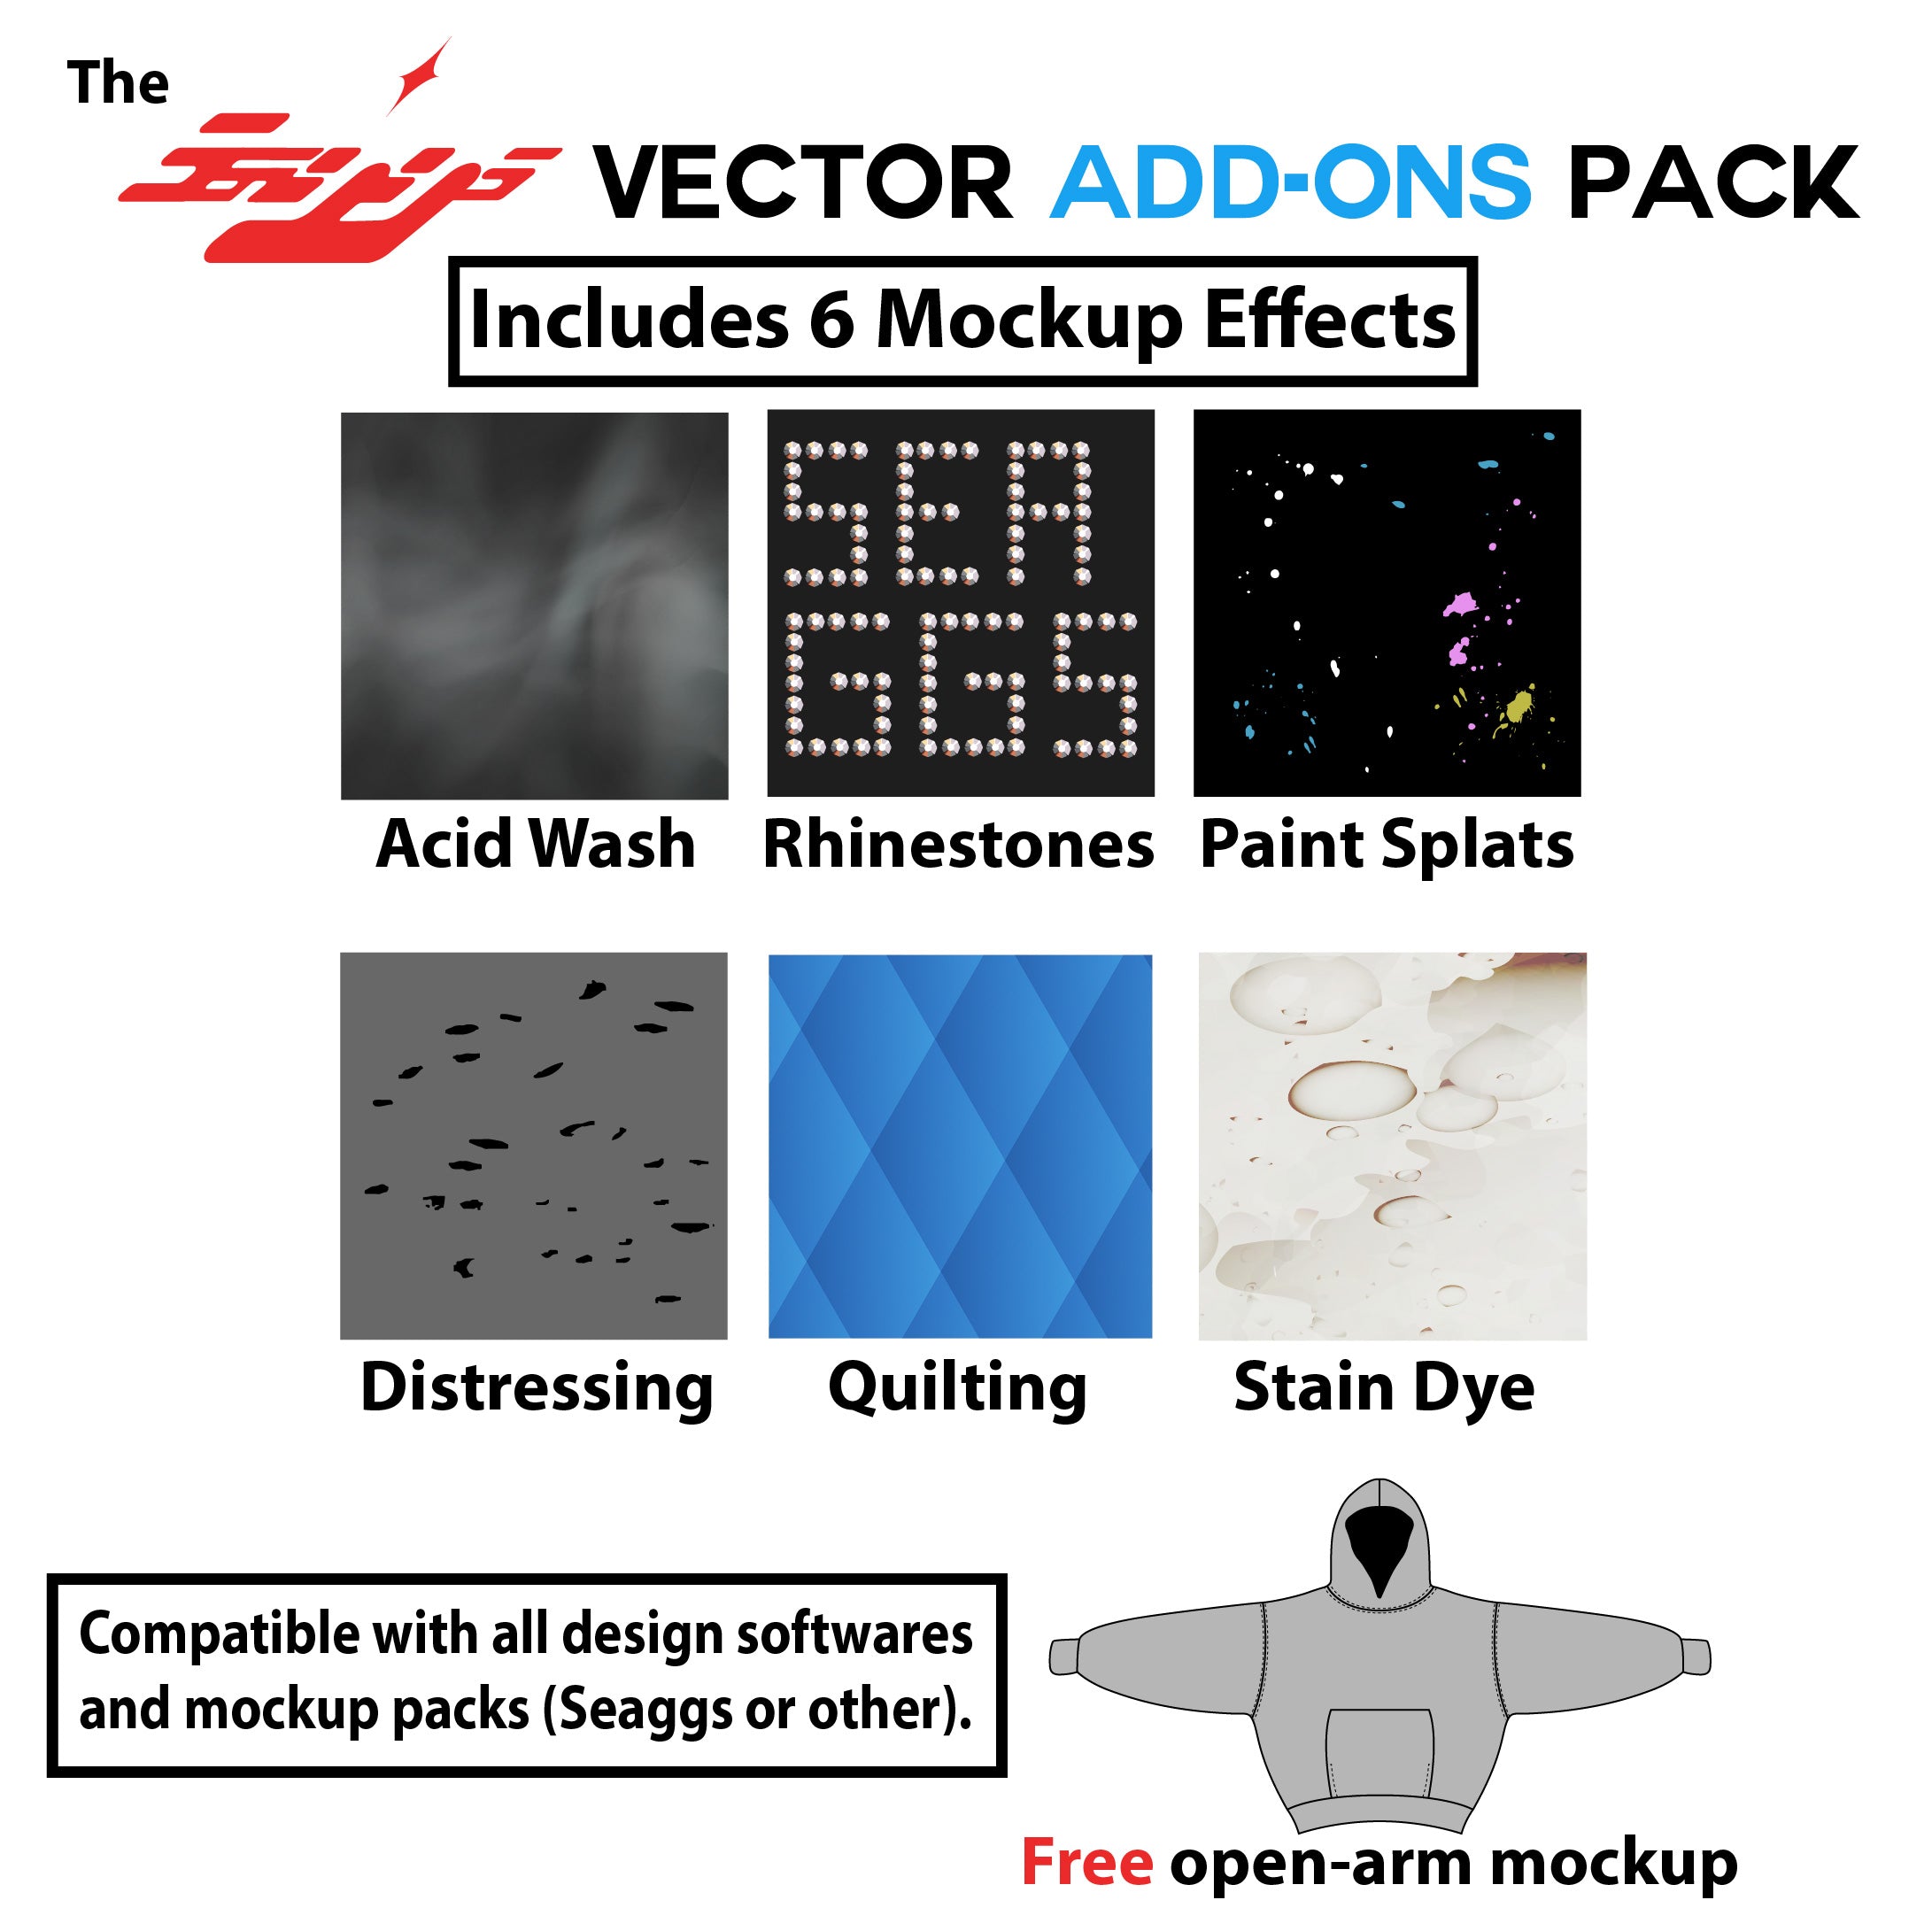 Seaggs Mockup Add-Ons Pack